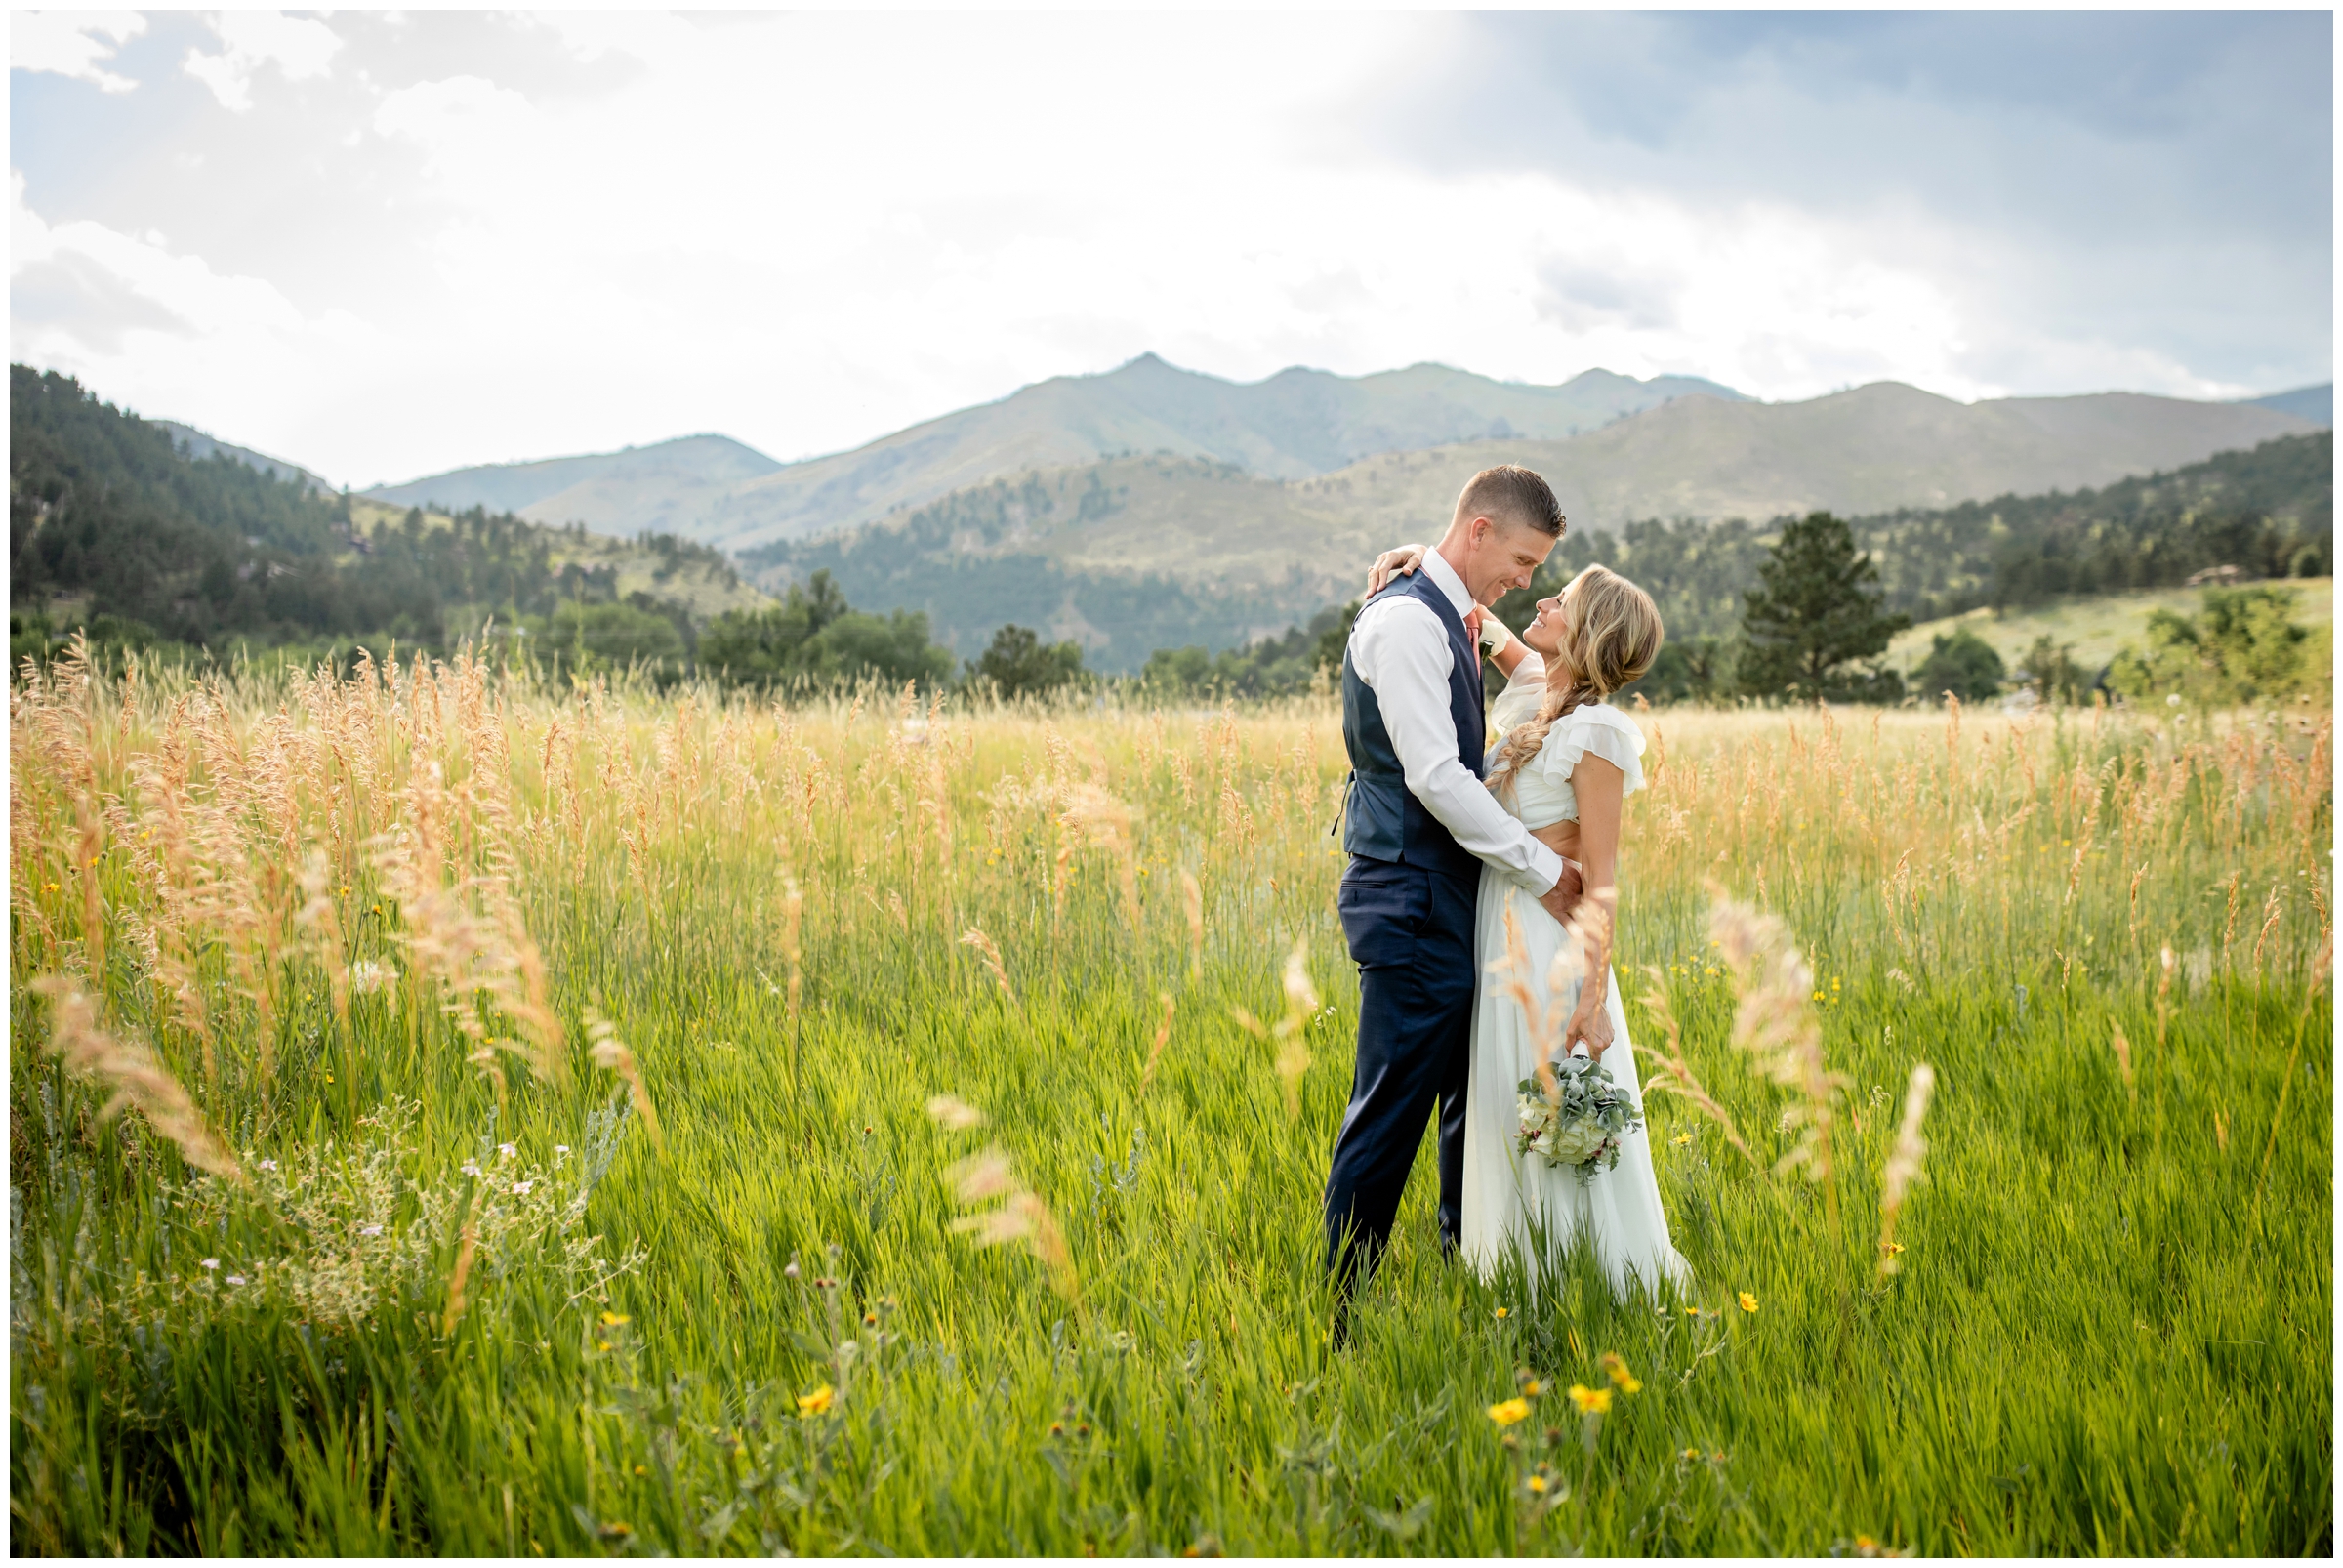 couple embracing in a mountain field during Greenbriar Inn wedding photography in Boulder Colorado